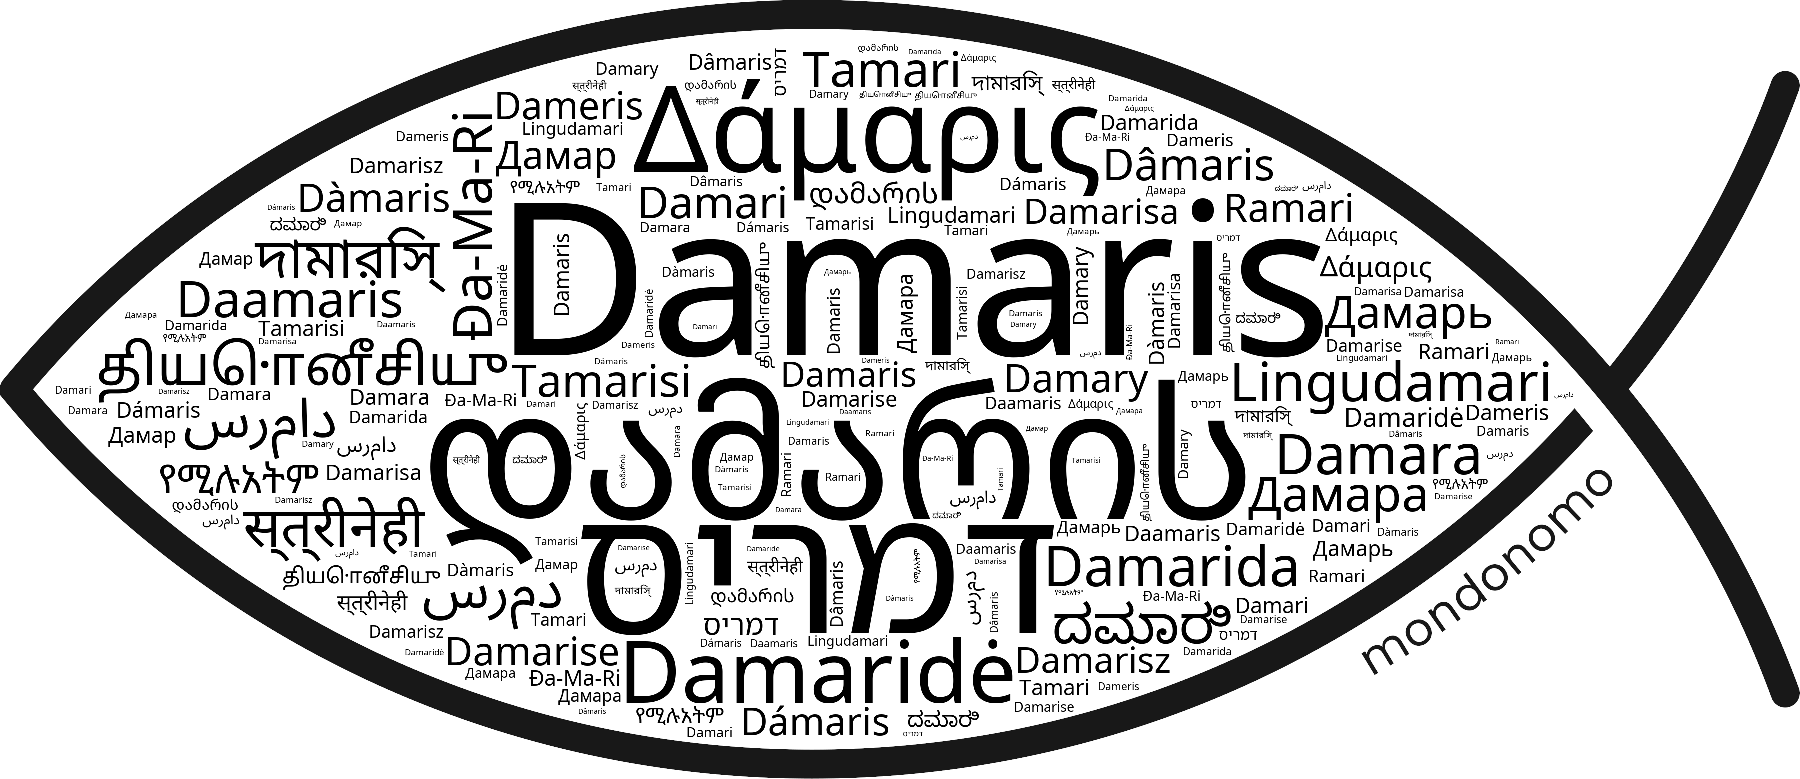 Name Damaris in the world's Bibles